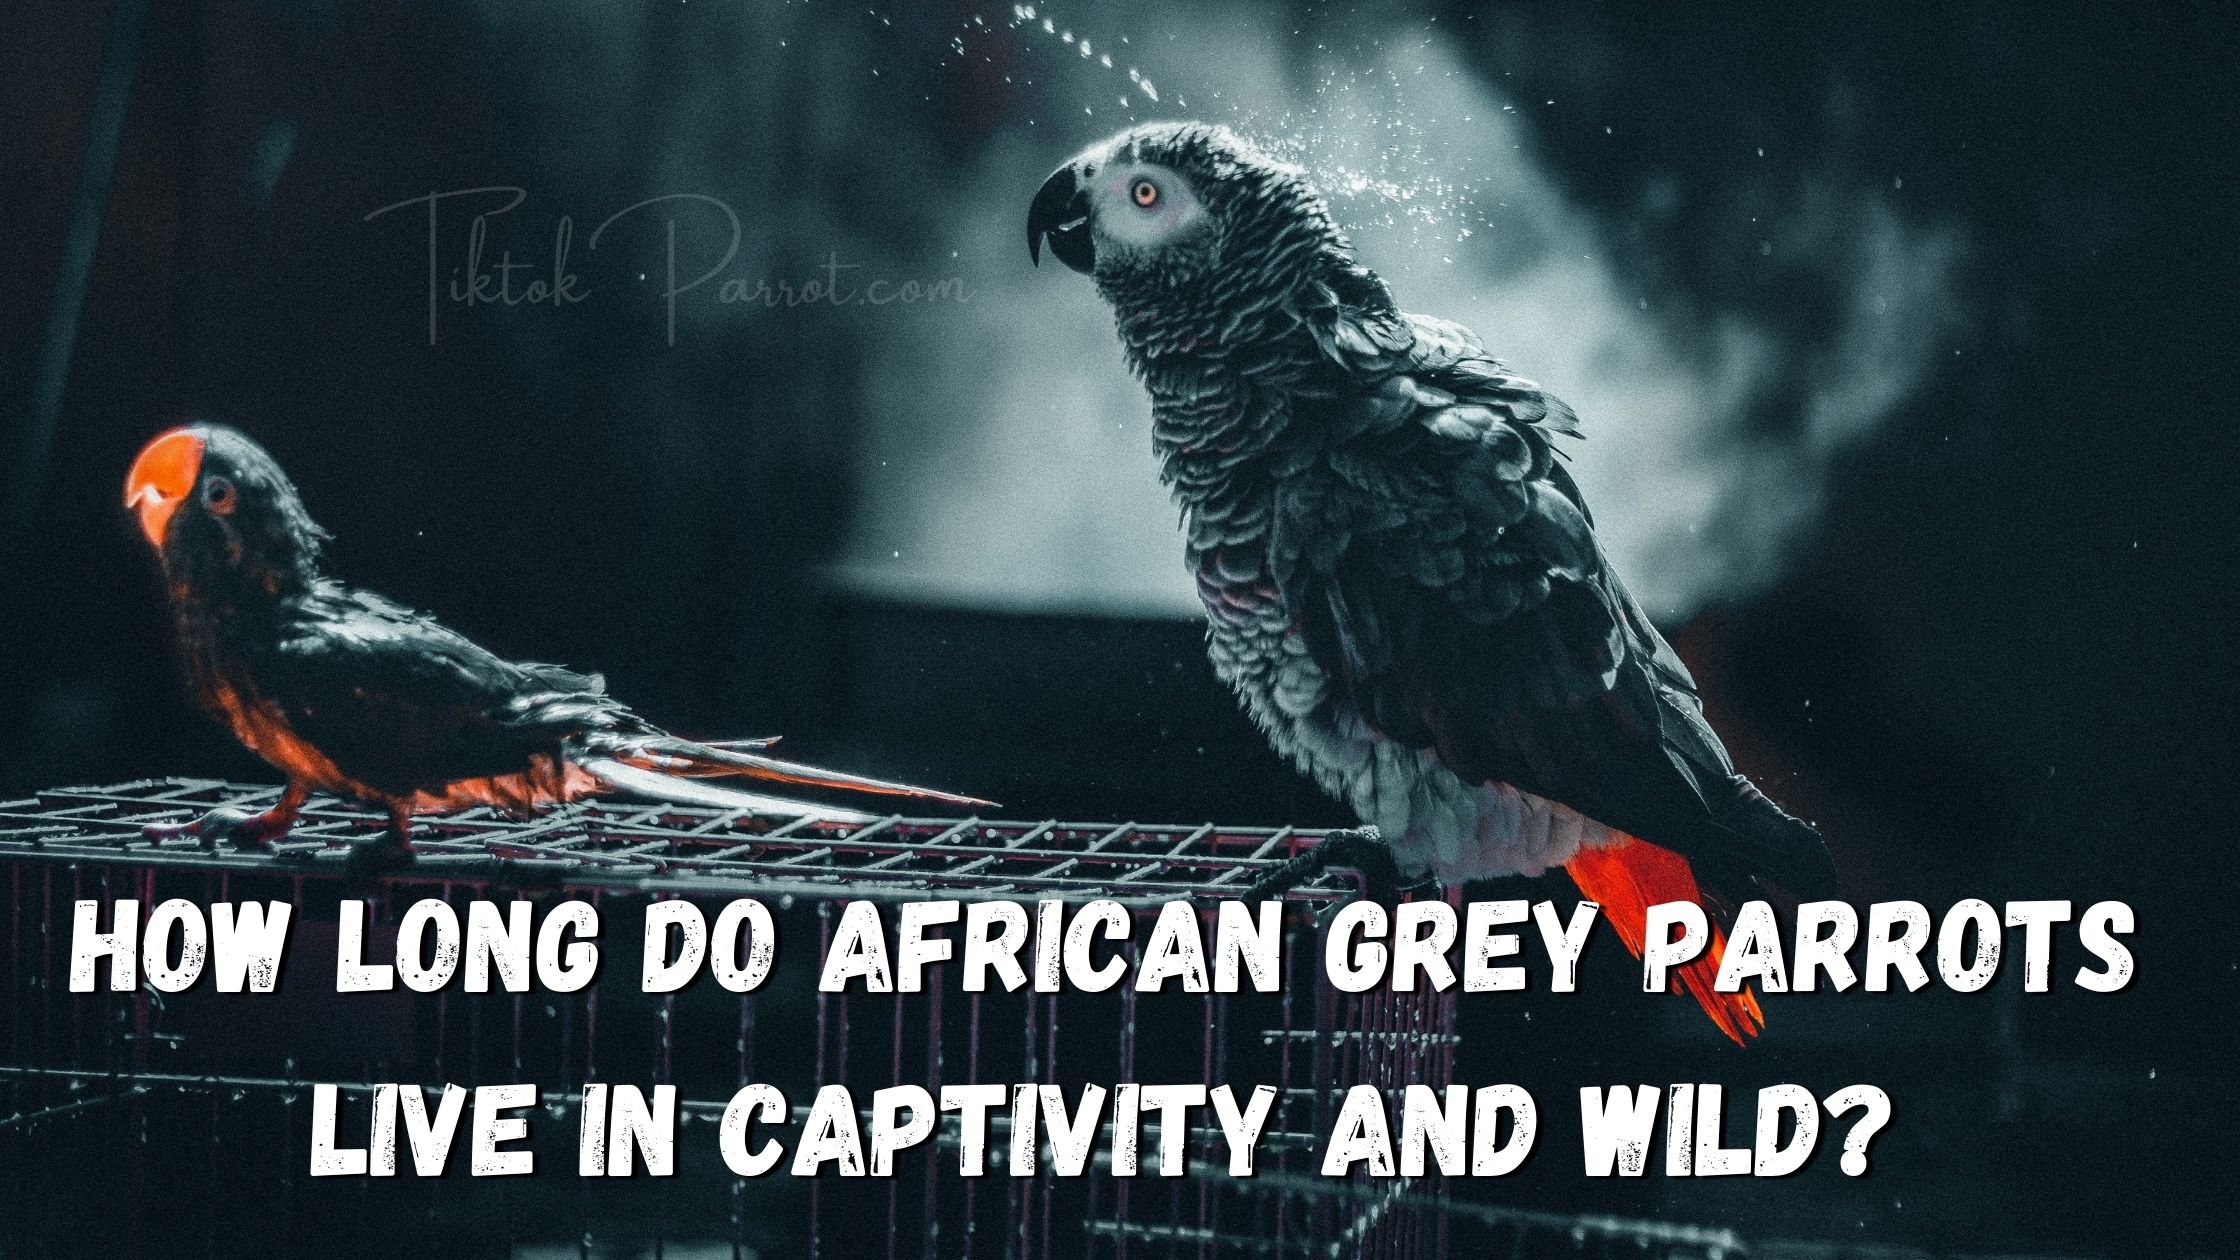 How Long Do African Grey Parrots Live in Captivity and Wild?